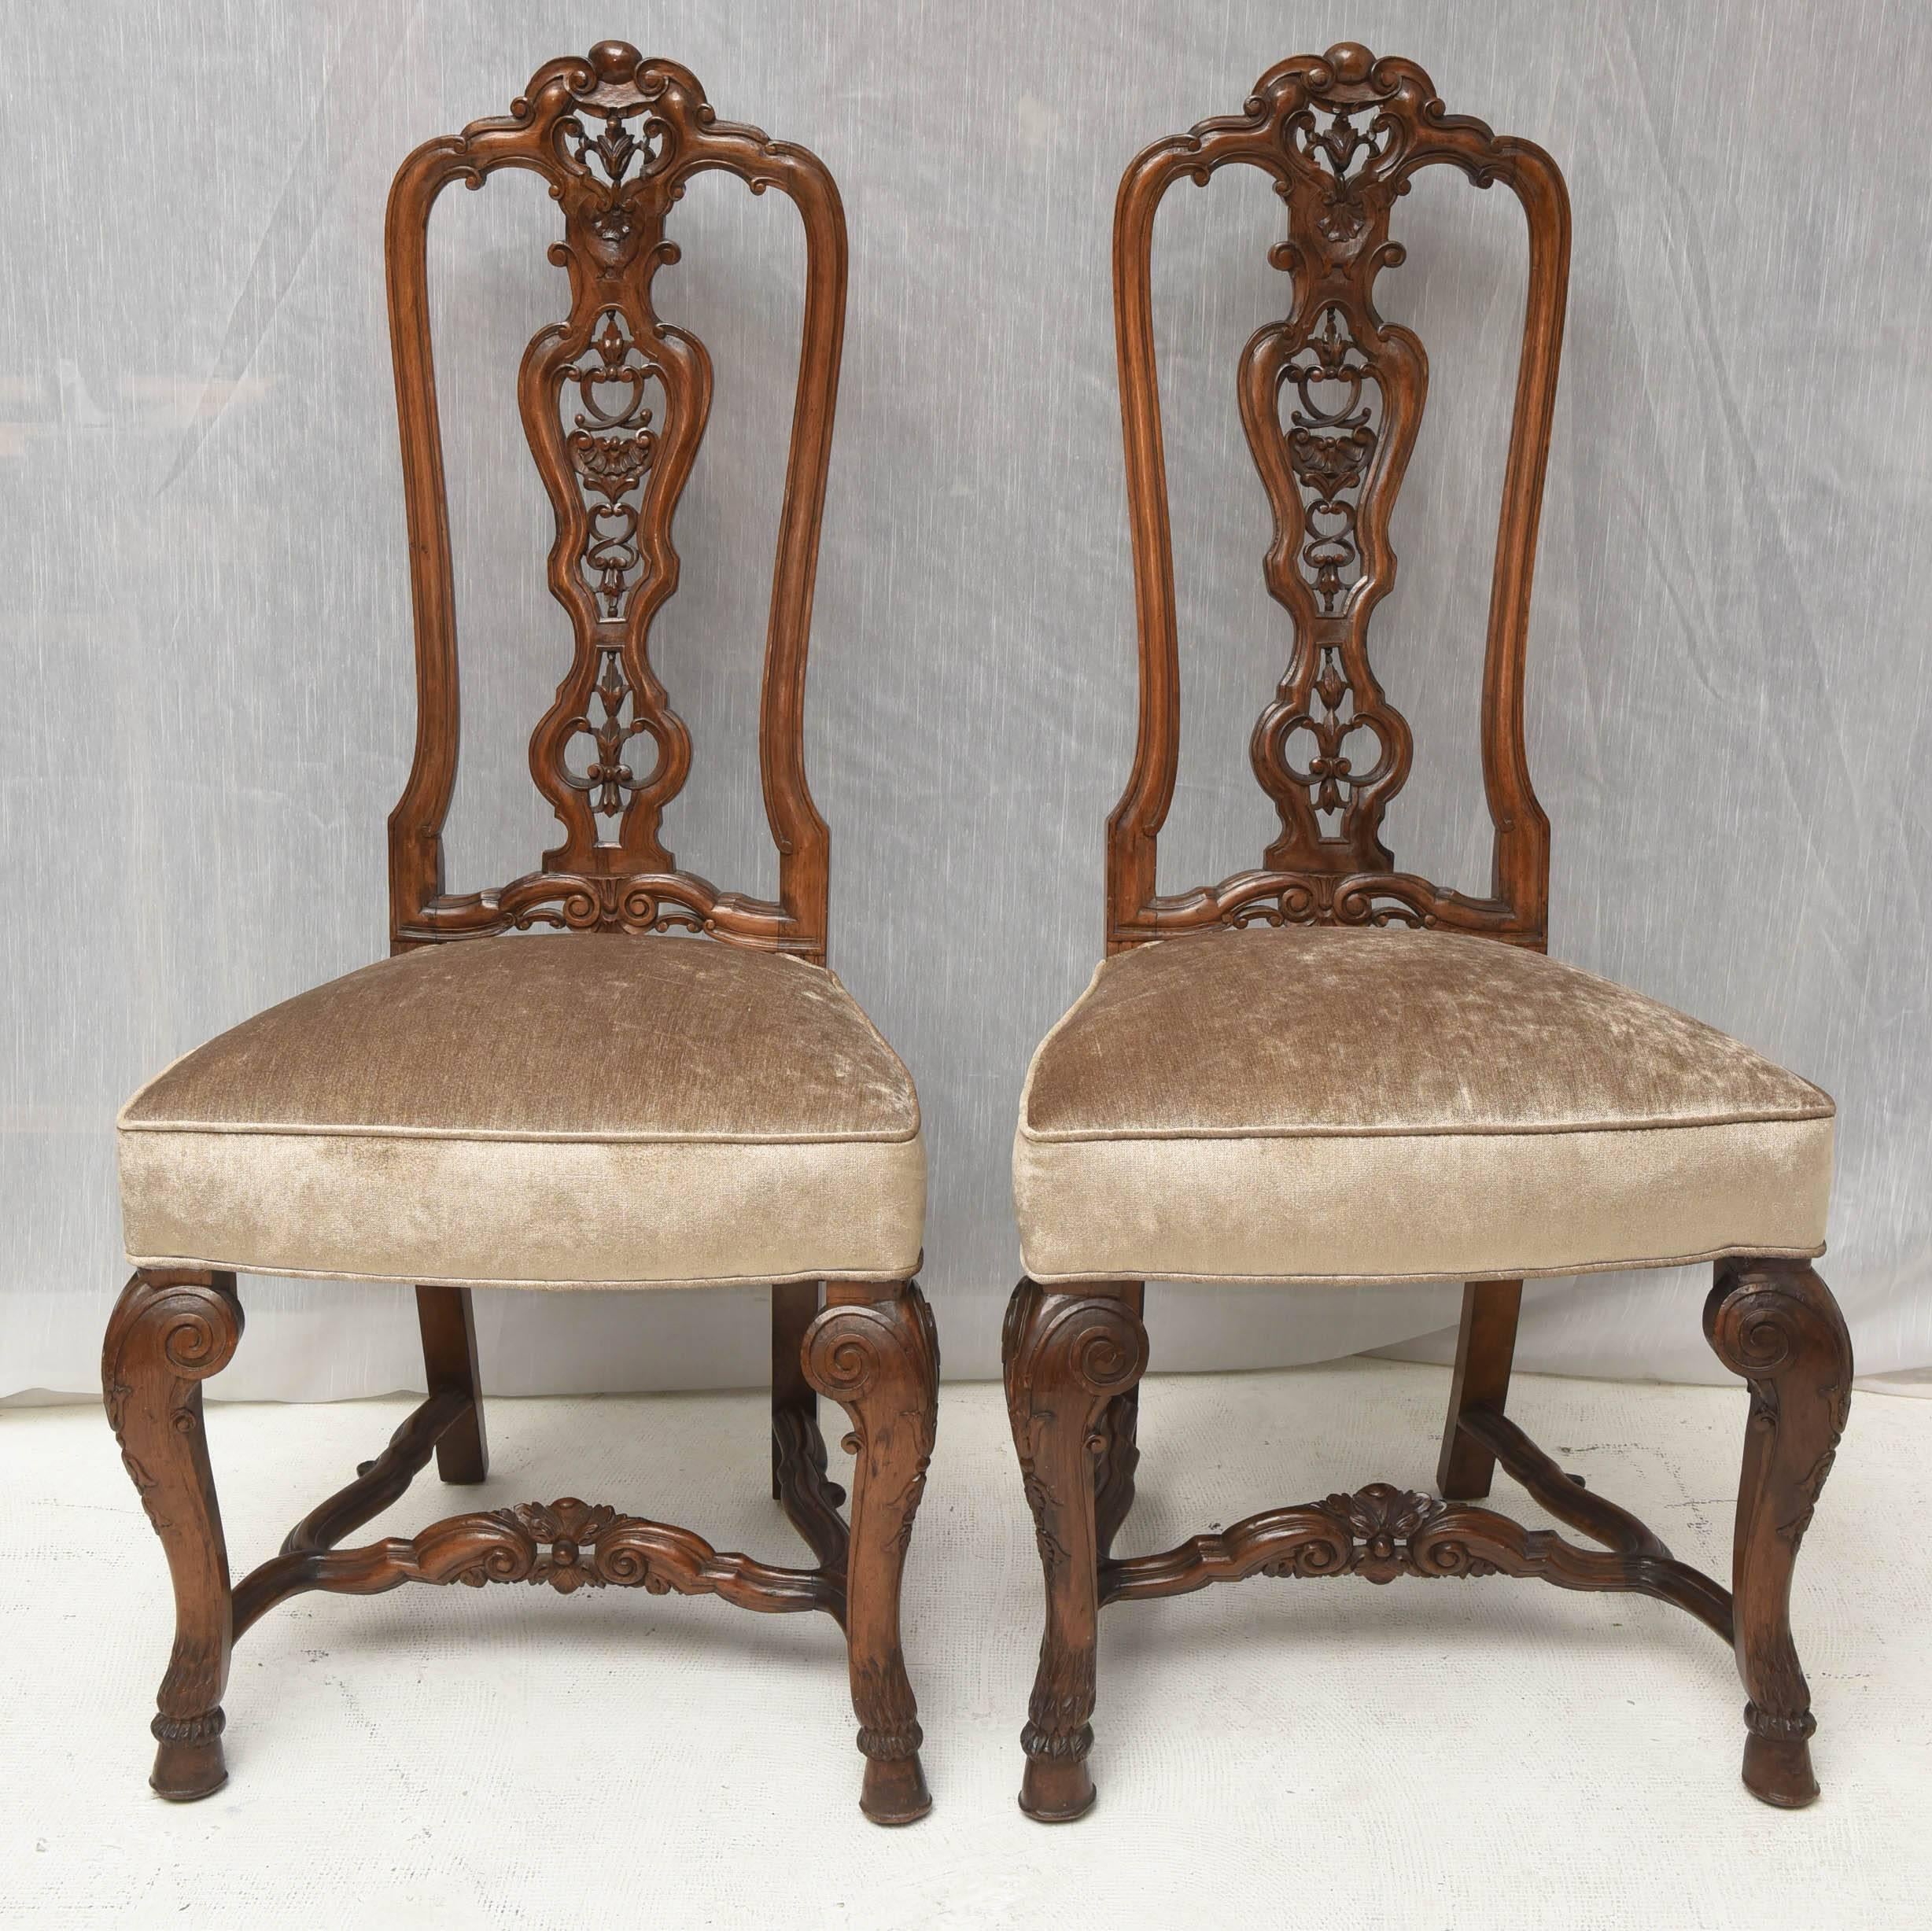 19th century pair of English walnut side chairs,
solid walnut carved in a very artistic craftsmanship.
Tight frame, recently reupholstered in a light velvet fabric.
Elegant design. Georgian style.